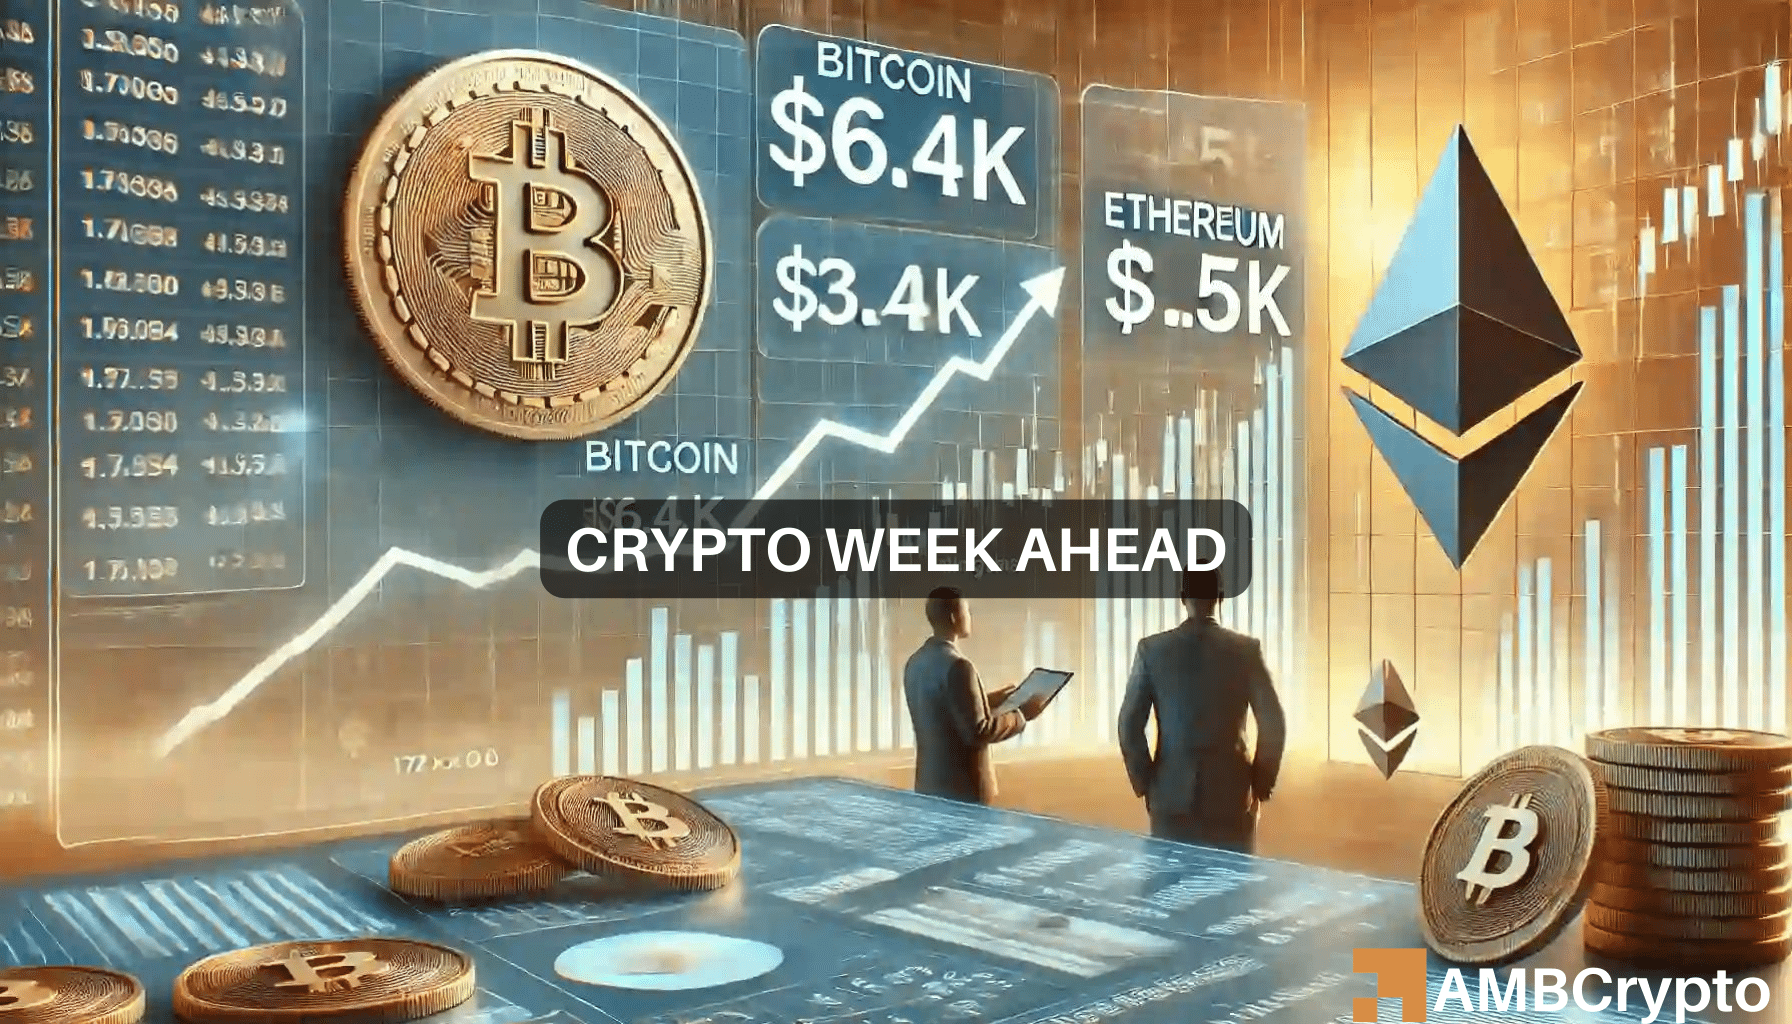 Crypto week ahead: Will Bitcoin, Ethereum hit new highs?